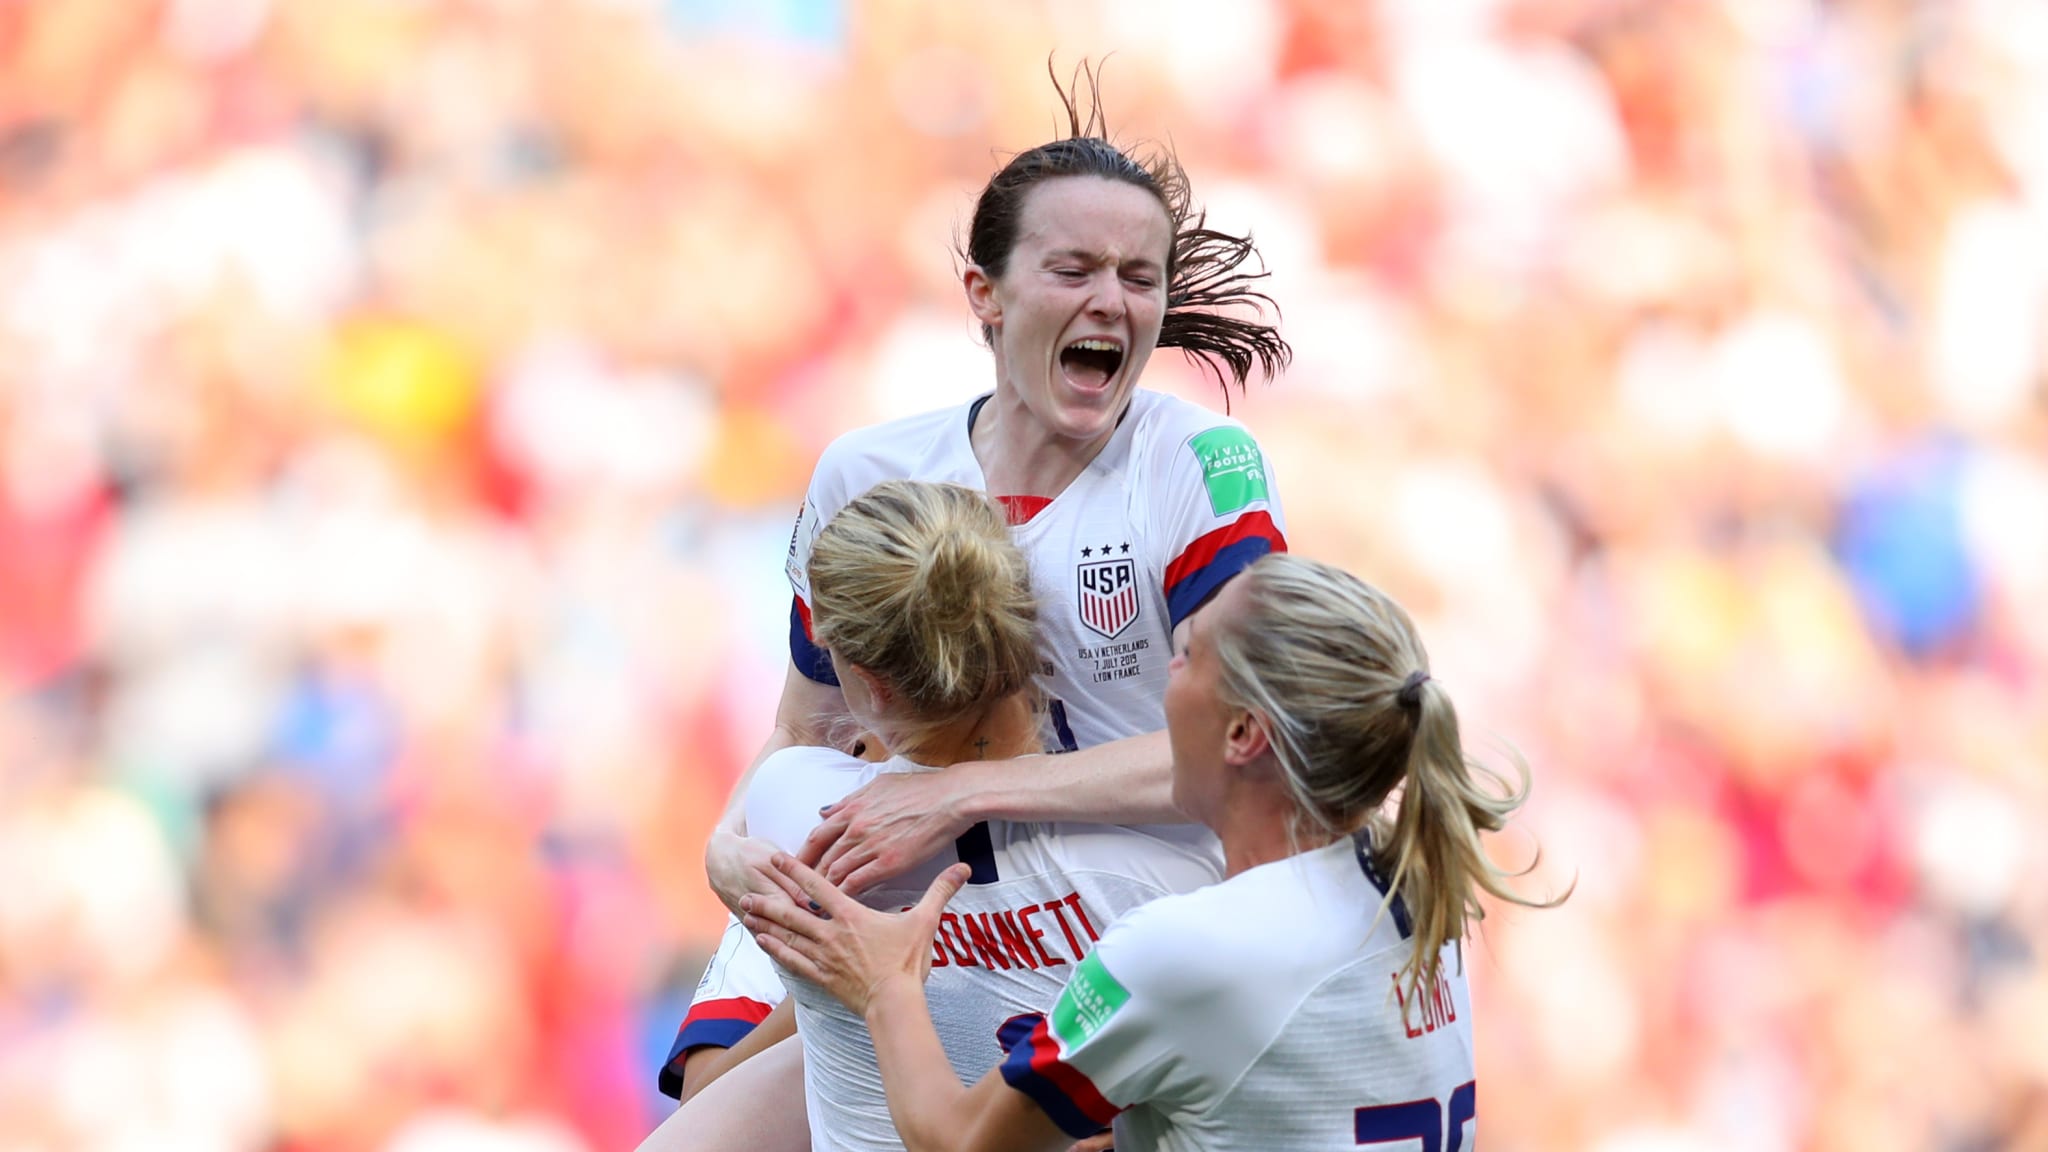 FIFA Women's World Cup 2019™: The mentality of this team is so special